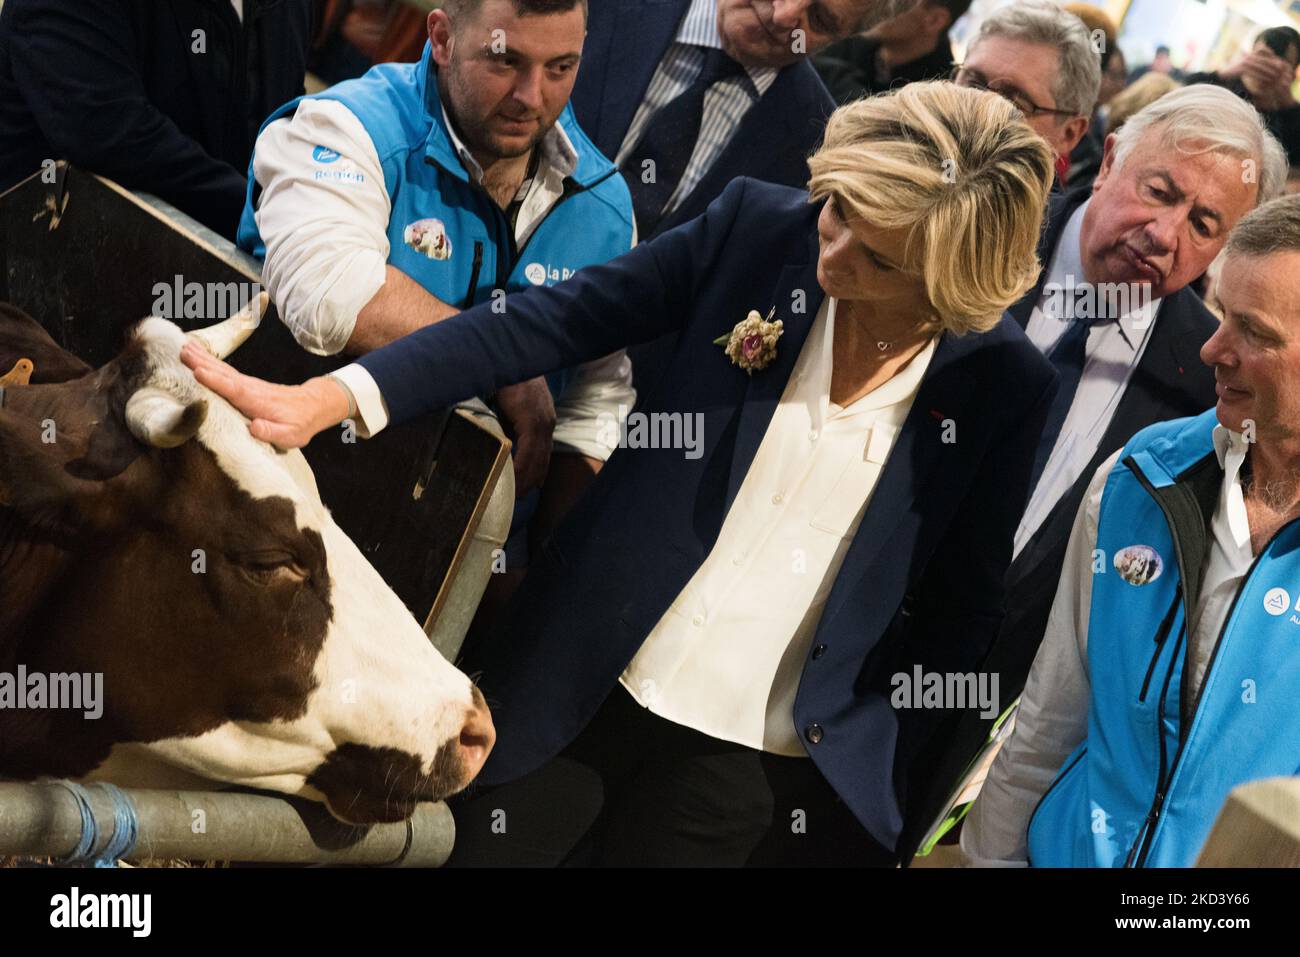 Valérie Pécresse, candidate for the French presidential election for the liberal right-wing party Les Républicains (LR), strokes the cow 'Neige' muse of the 2022 edition of the show during the traditional visit of the presidential candidates of the International Agricultural Show currently held at the Parc des Exposition de la Porte de Versailles in Paris on February 28, 2022. (Photo by Samuel Boivin/NurPhoto) Stock Photo